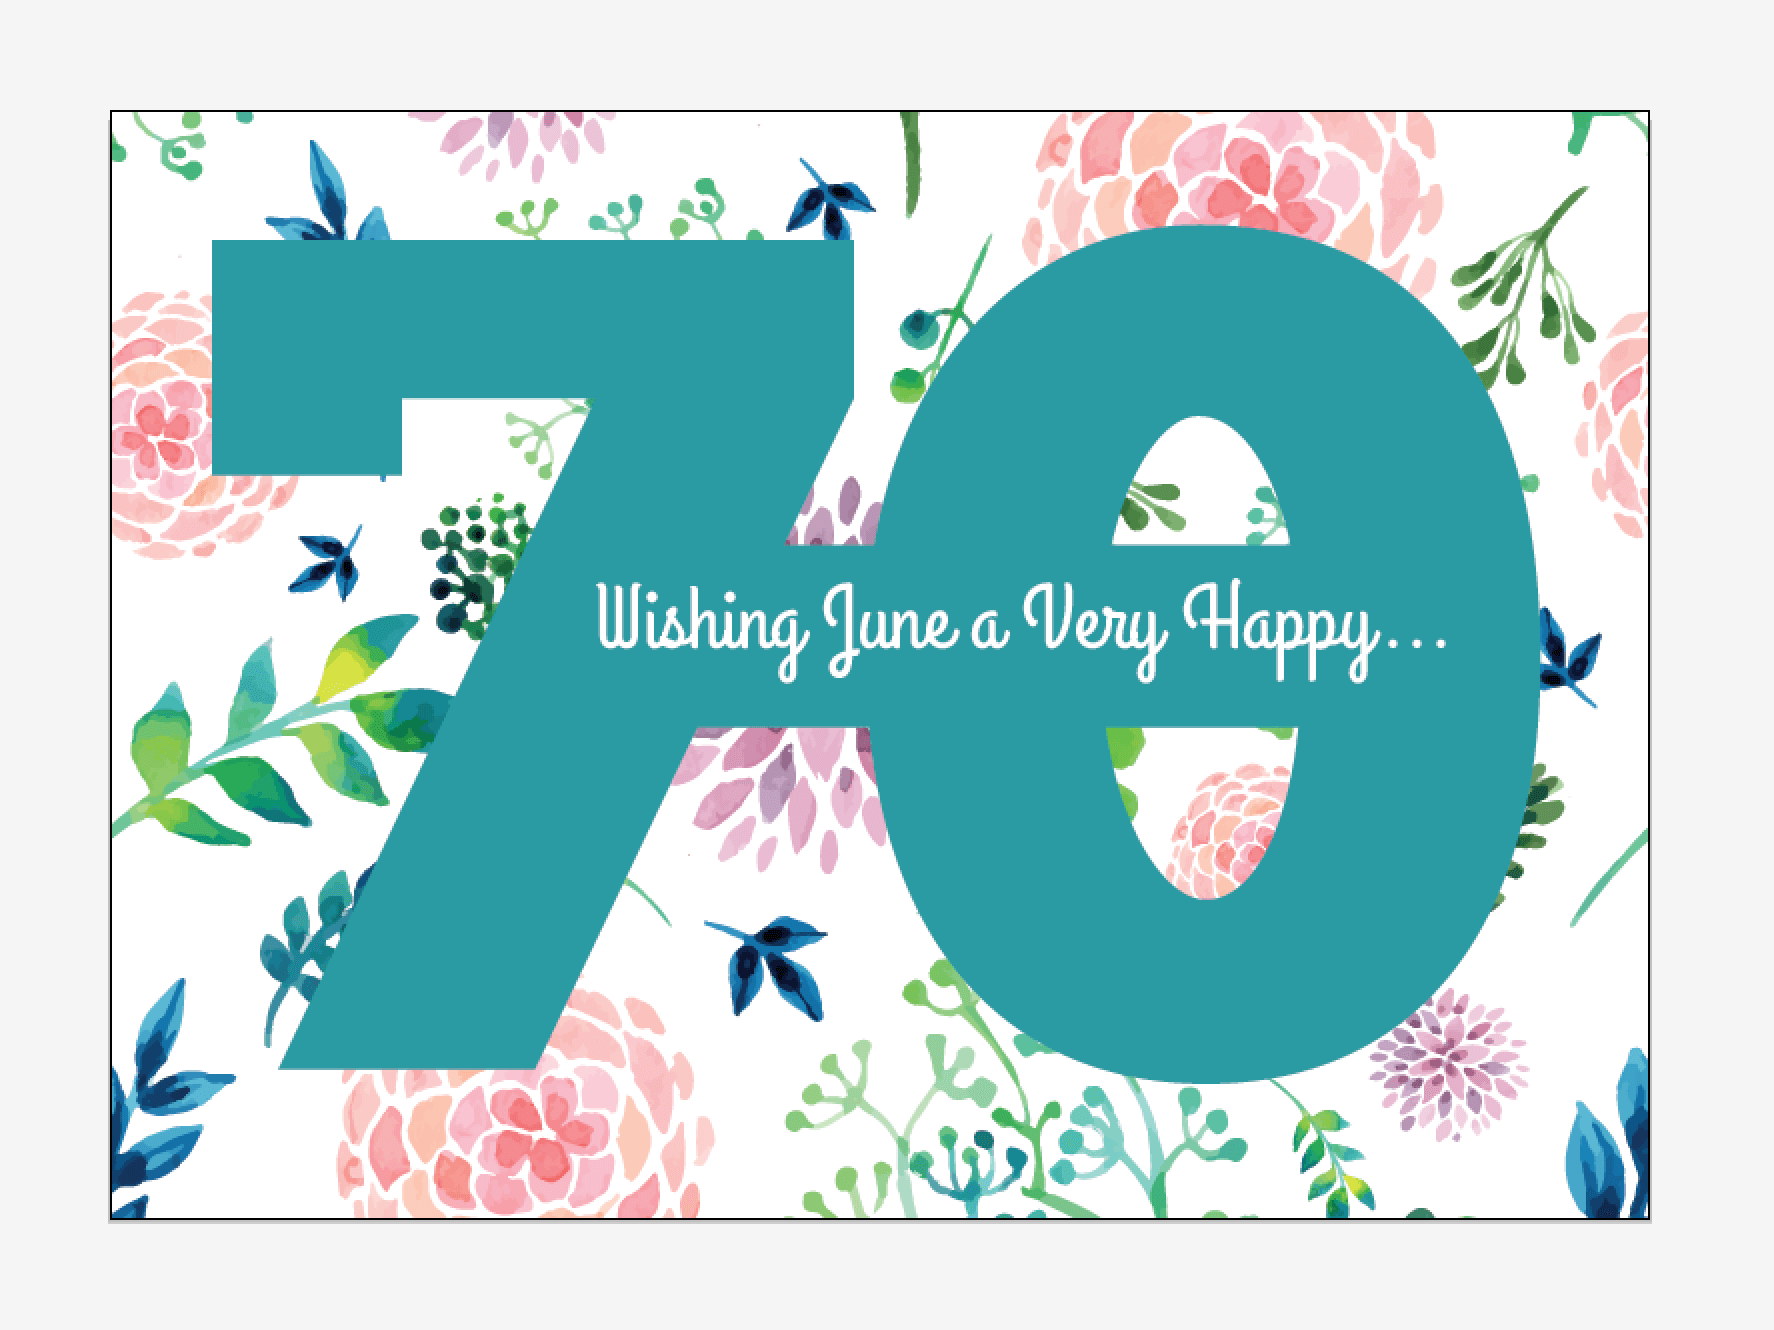 Here's a memorable and fun milestone birthday idea: a mailbox stuffed with personalized watercolor birthday postcards with well wishes from family and friends! Make them for 60th, 65th, 75th, 70th, 80th, 50th, 40th, 90th, 100th birthdays.